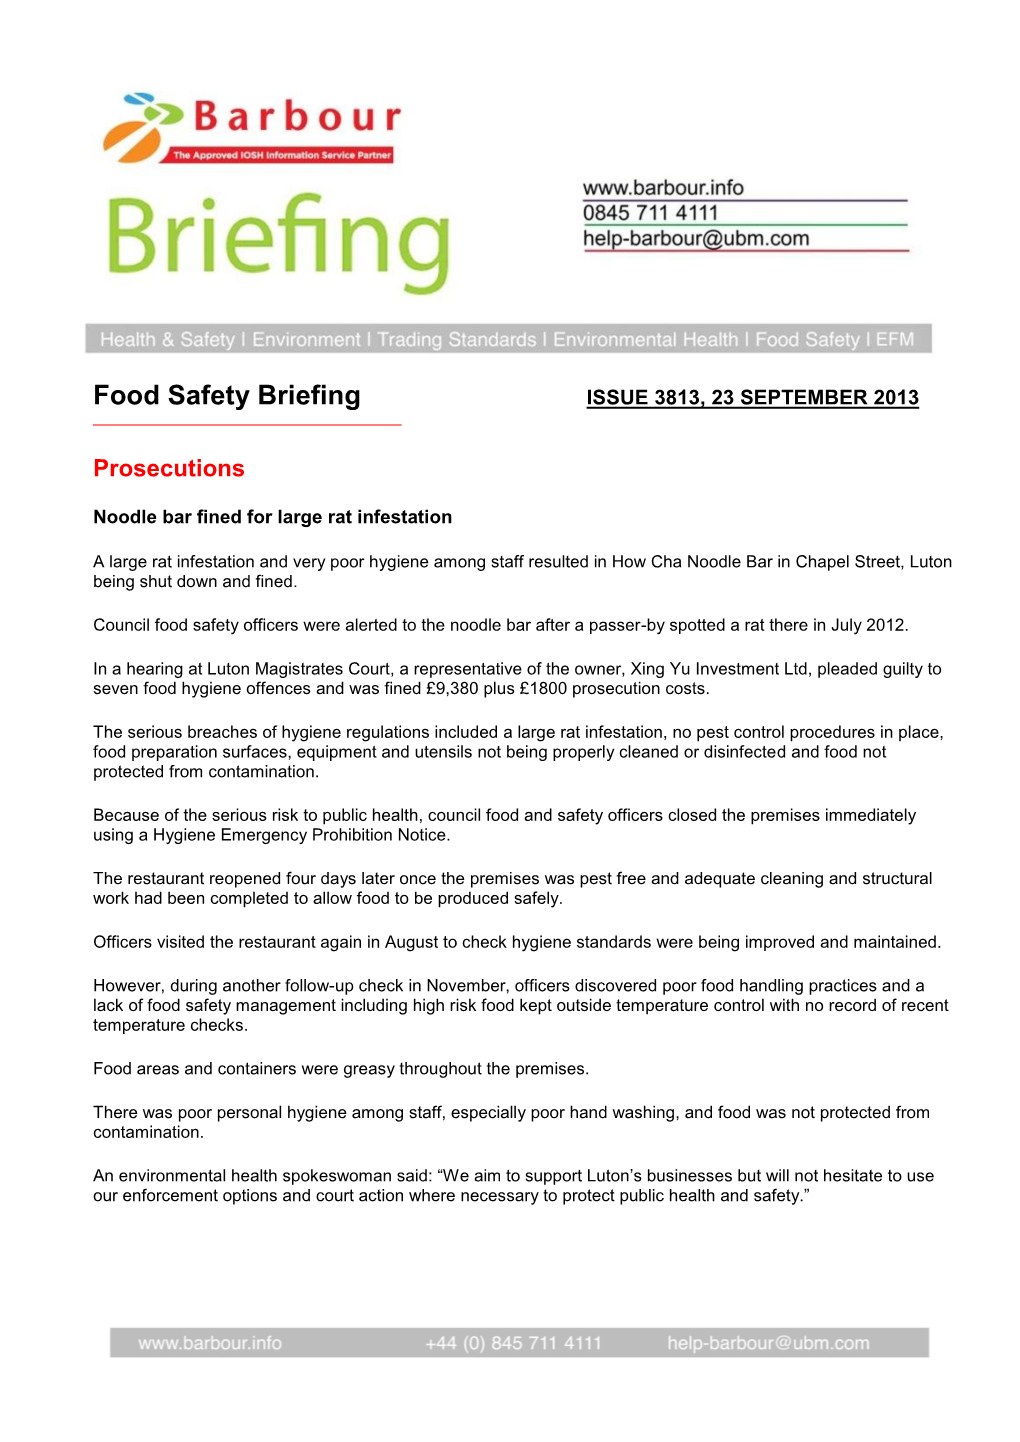 Food Safety Briefing ISSUE 3813, 23 SEPTEMBER 2013